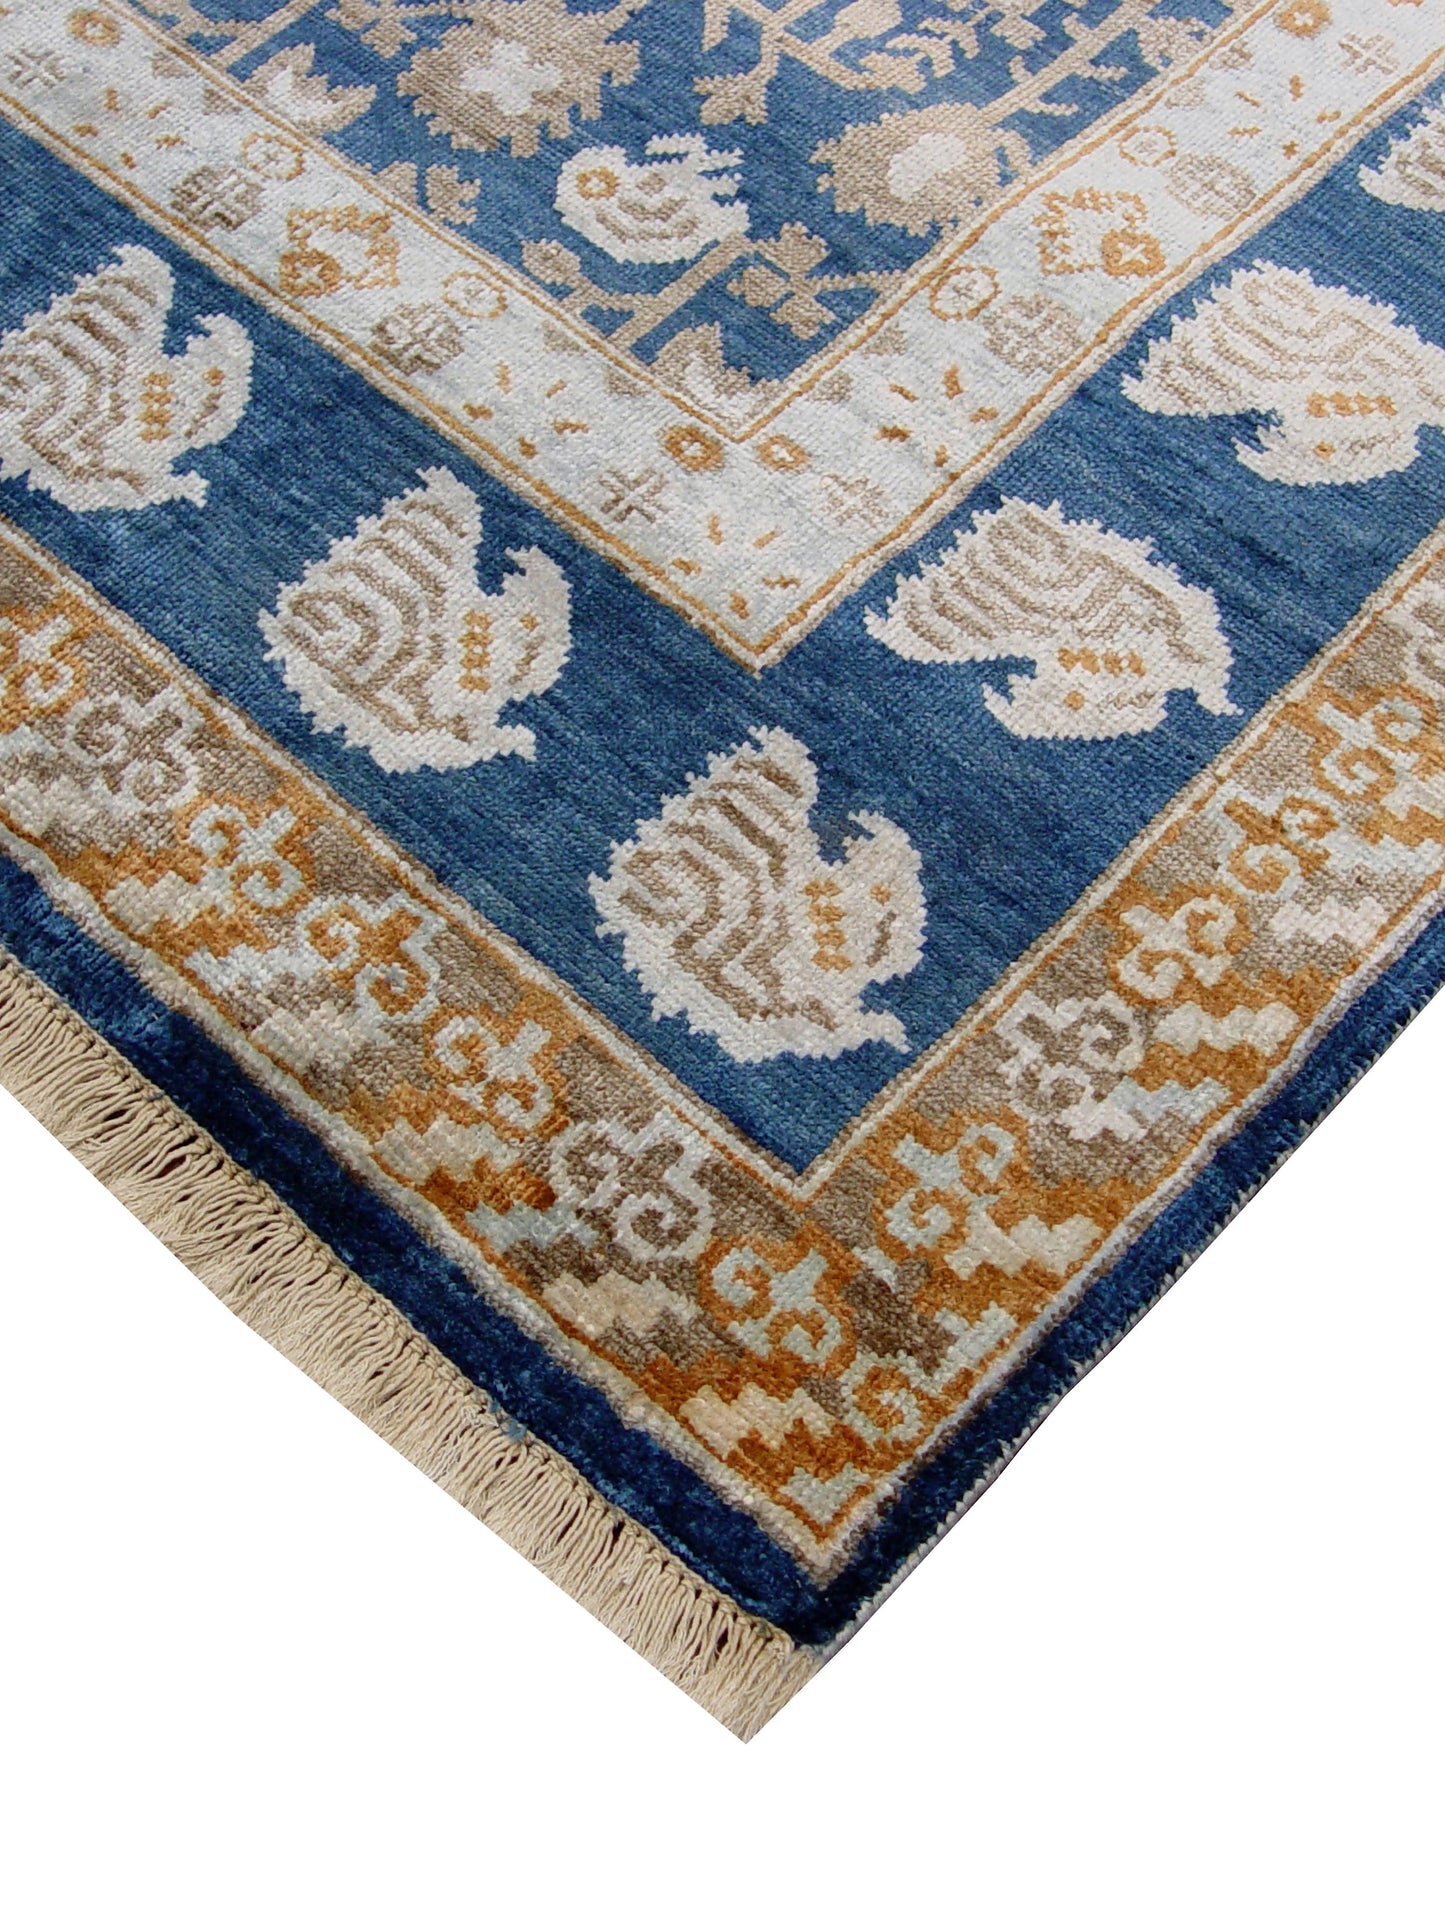 Get trendy with Blue and Ivory Pure Silk Handknotted Area Rug 5.11x8.10ft 180x269Cms - Contemporary Rugs available at Jaipur Oriental Rugs. Grab yours for $3665.00 today!